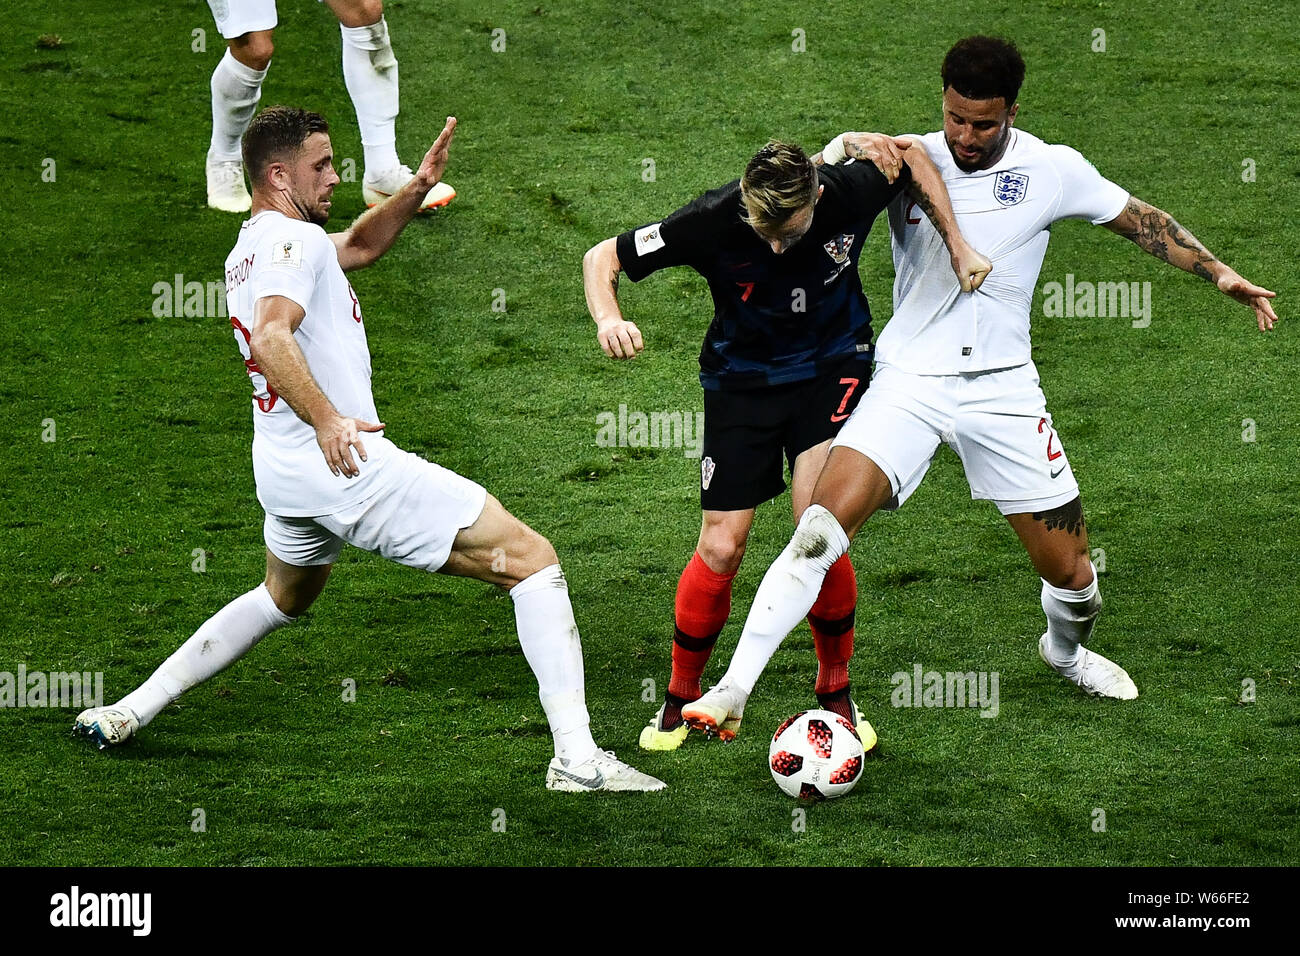 Ivan Rakitic of Croatia, center, challenges Kyle Walker, right, and Jordan Henderson of England in their semifinal match during the 2018 FIFA World Cu Stock Photo